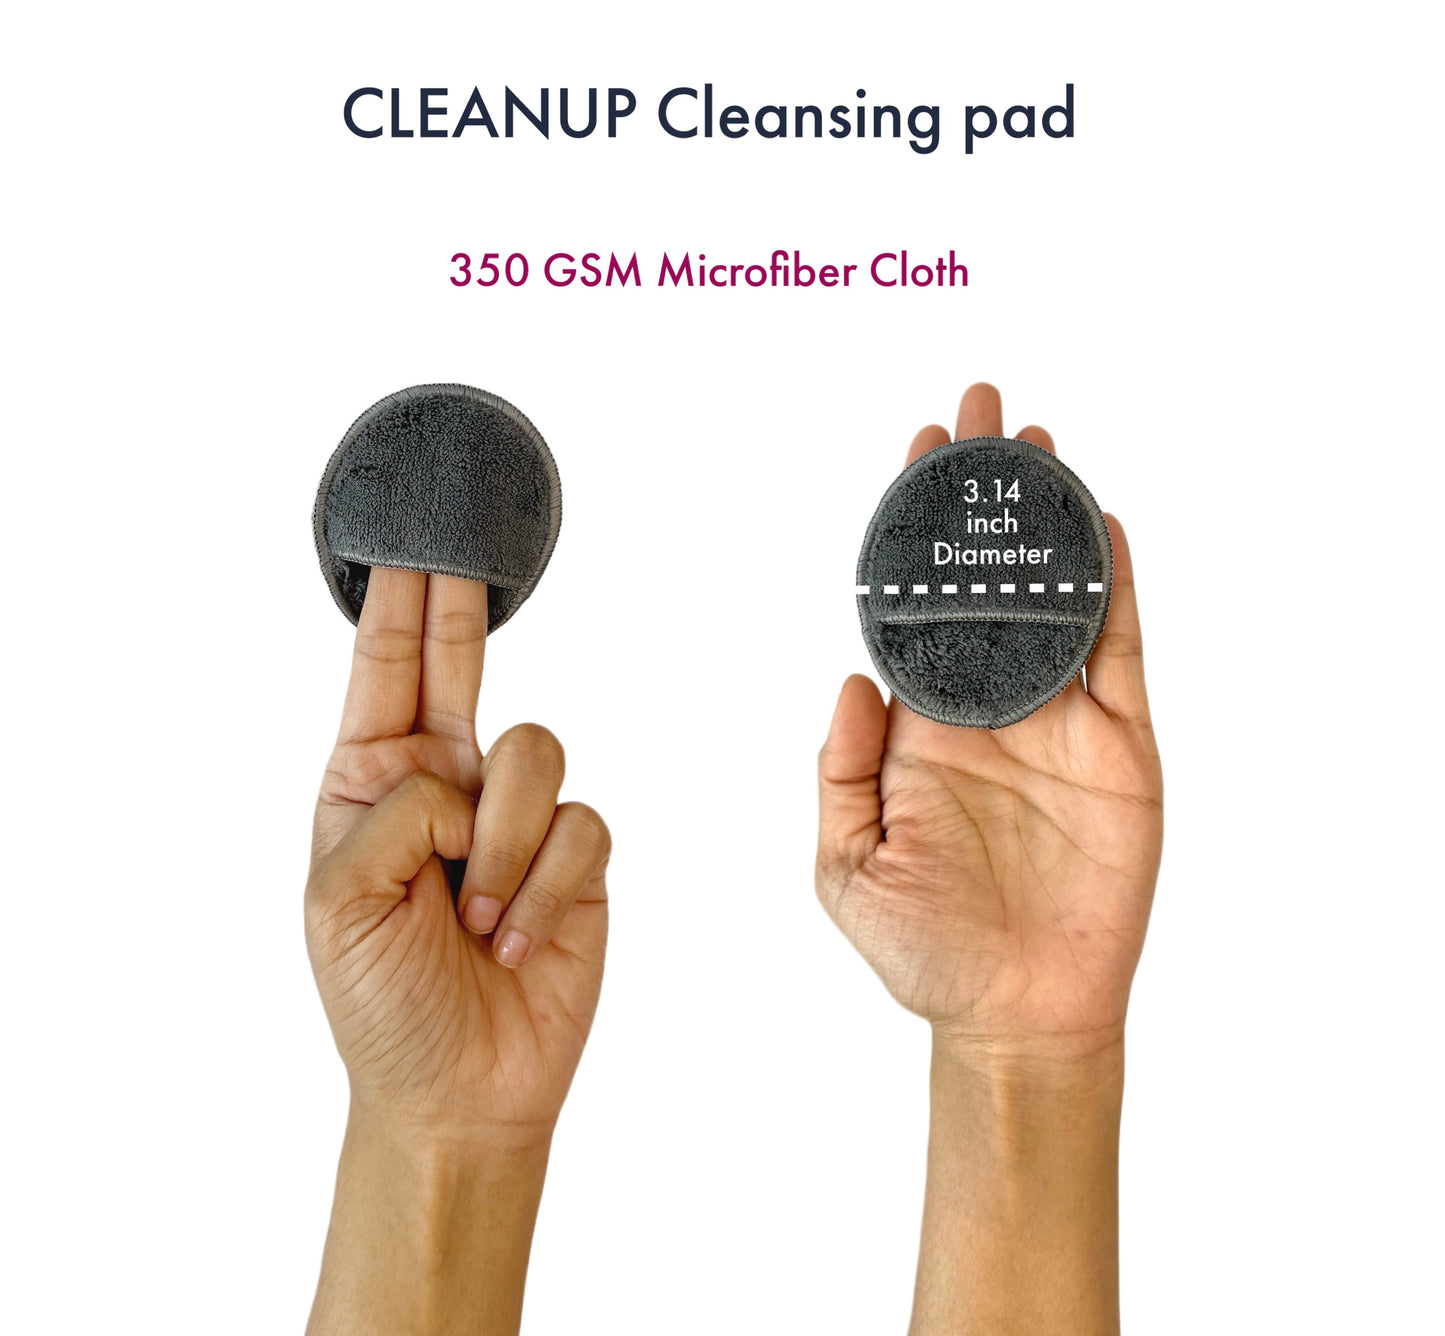 CLEANUP Makeup Remover + FREE Cleansing pad